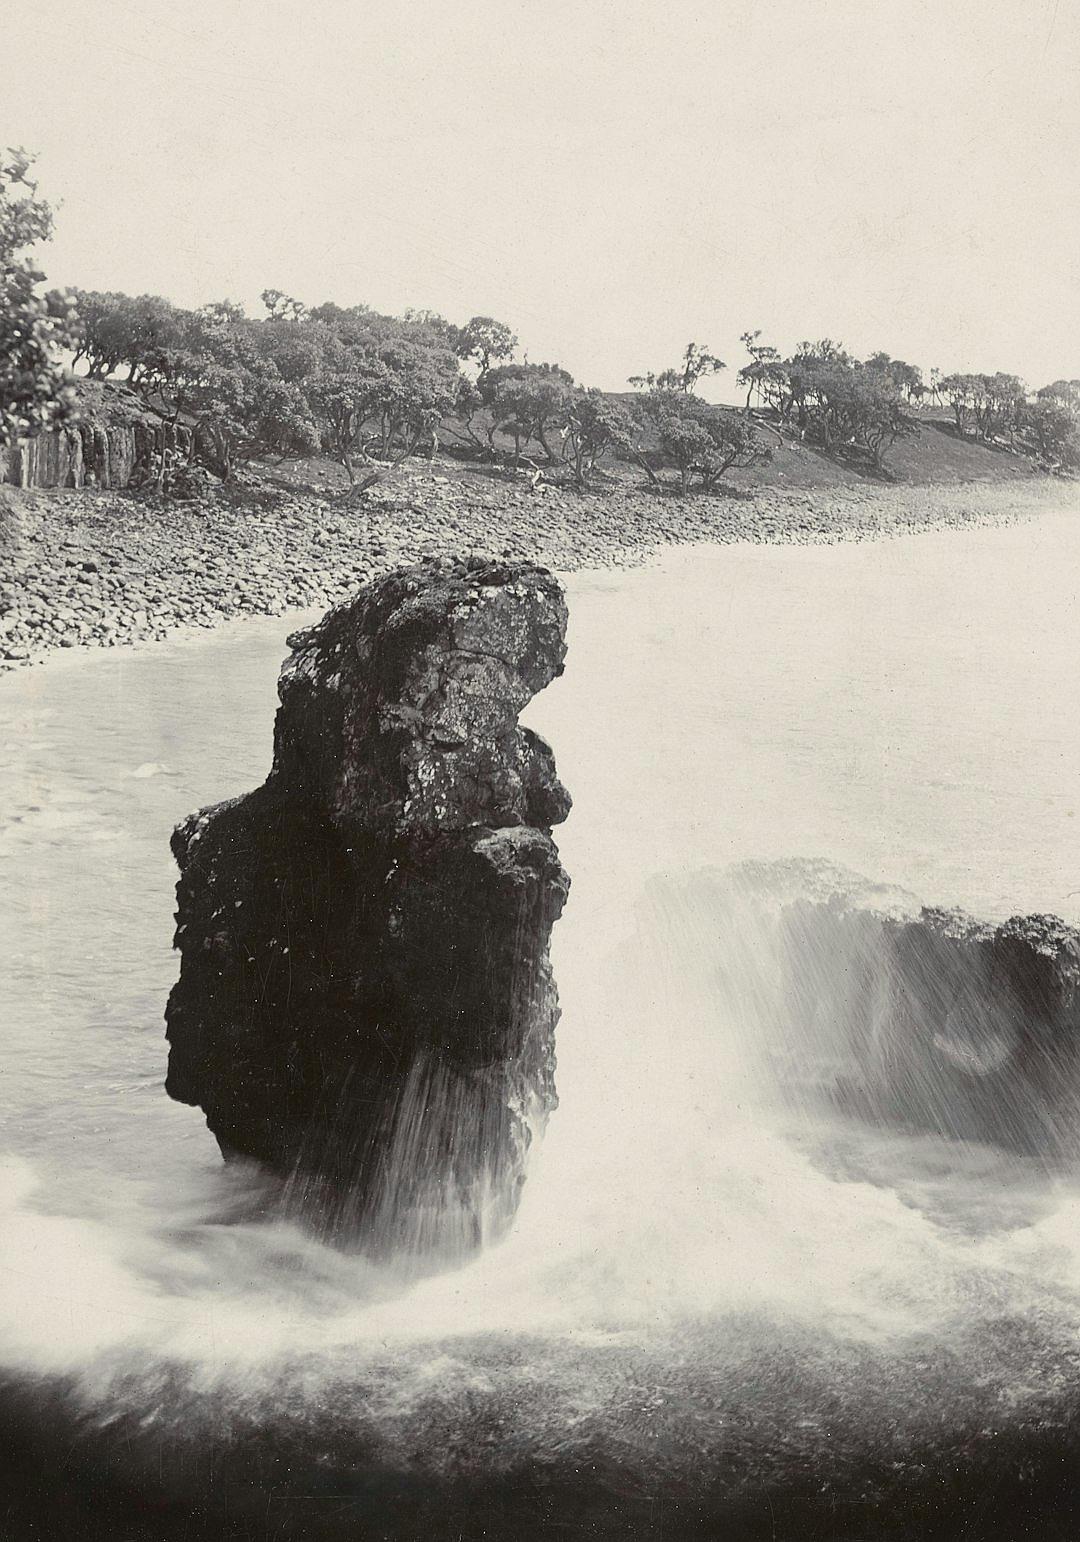 A black and white photograph of the Sylinder rock in horizontally position standing on its side at Isla de Tenerife, Spain, with water cascading off it into rough waves. The background shows trees and rocks along an open river valley, taken by photographer [Eadweard Muybridge](https://goo.gl/search?artist%20Eadweard%20Muybridge) from his masterpiece ‘The Boticelli extends to one” series.